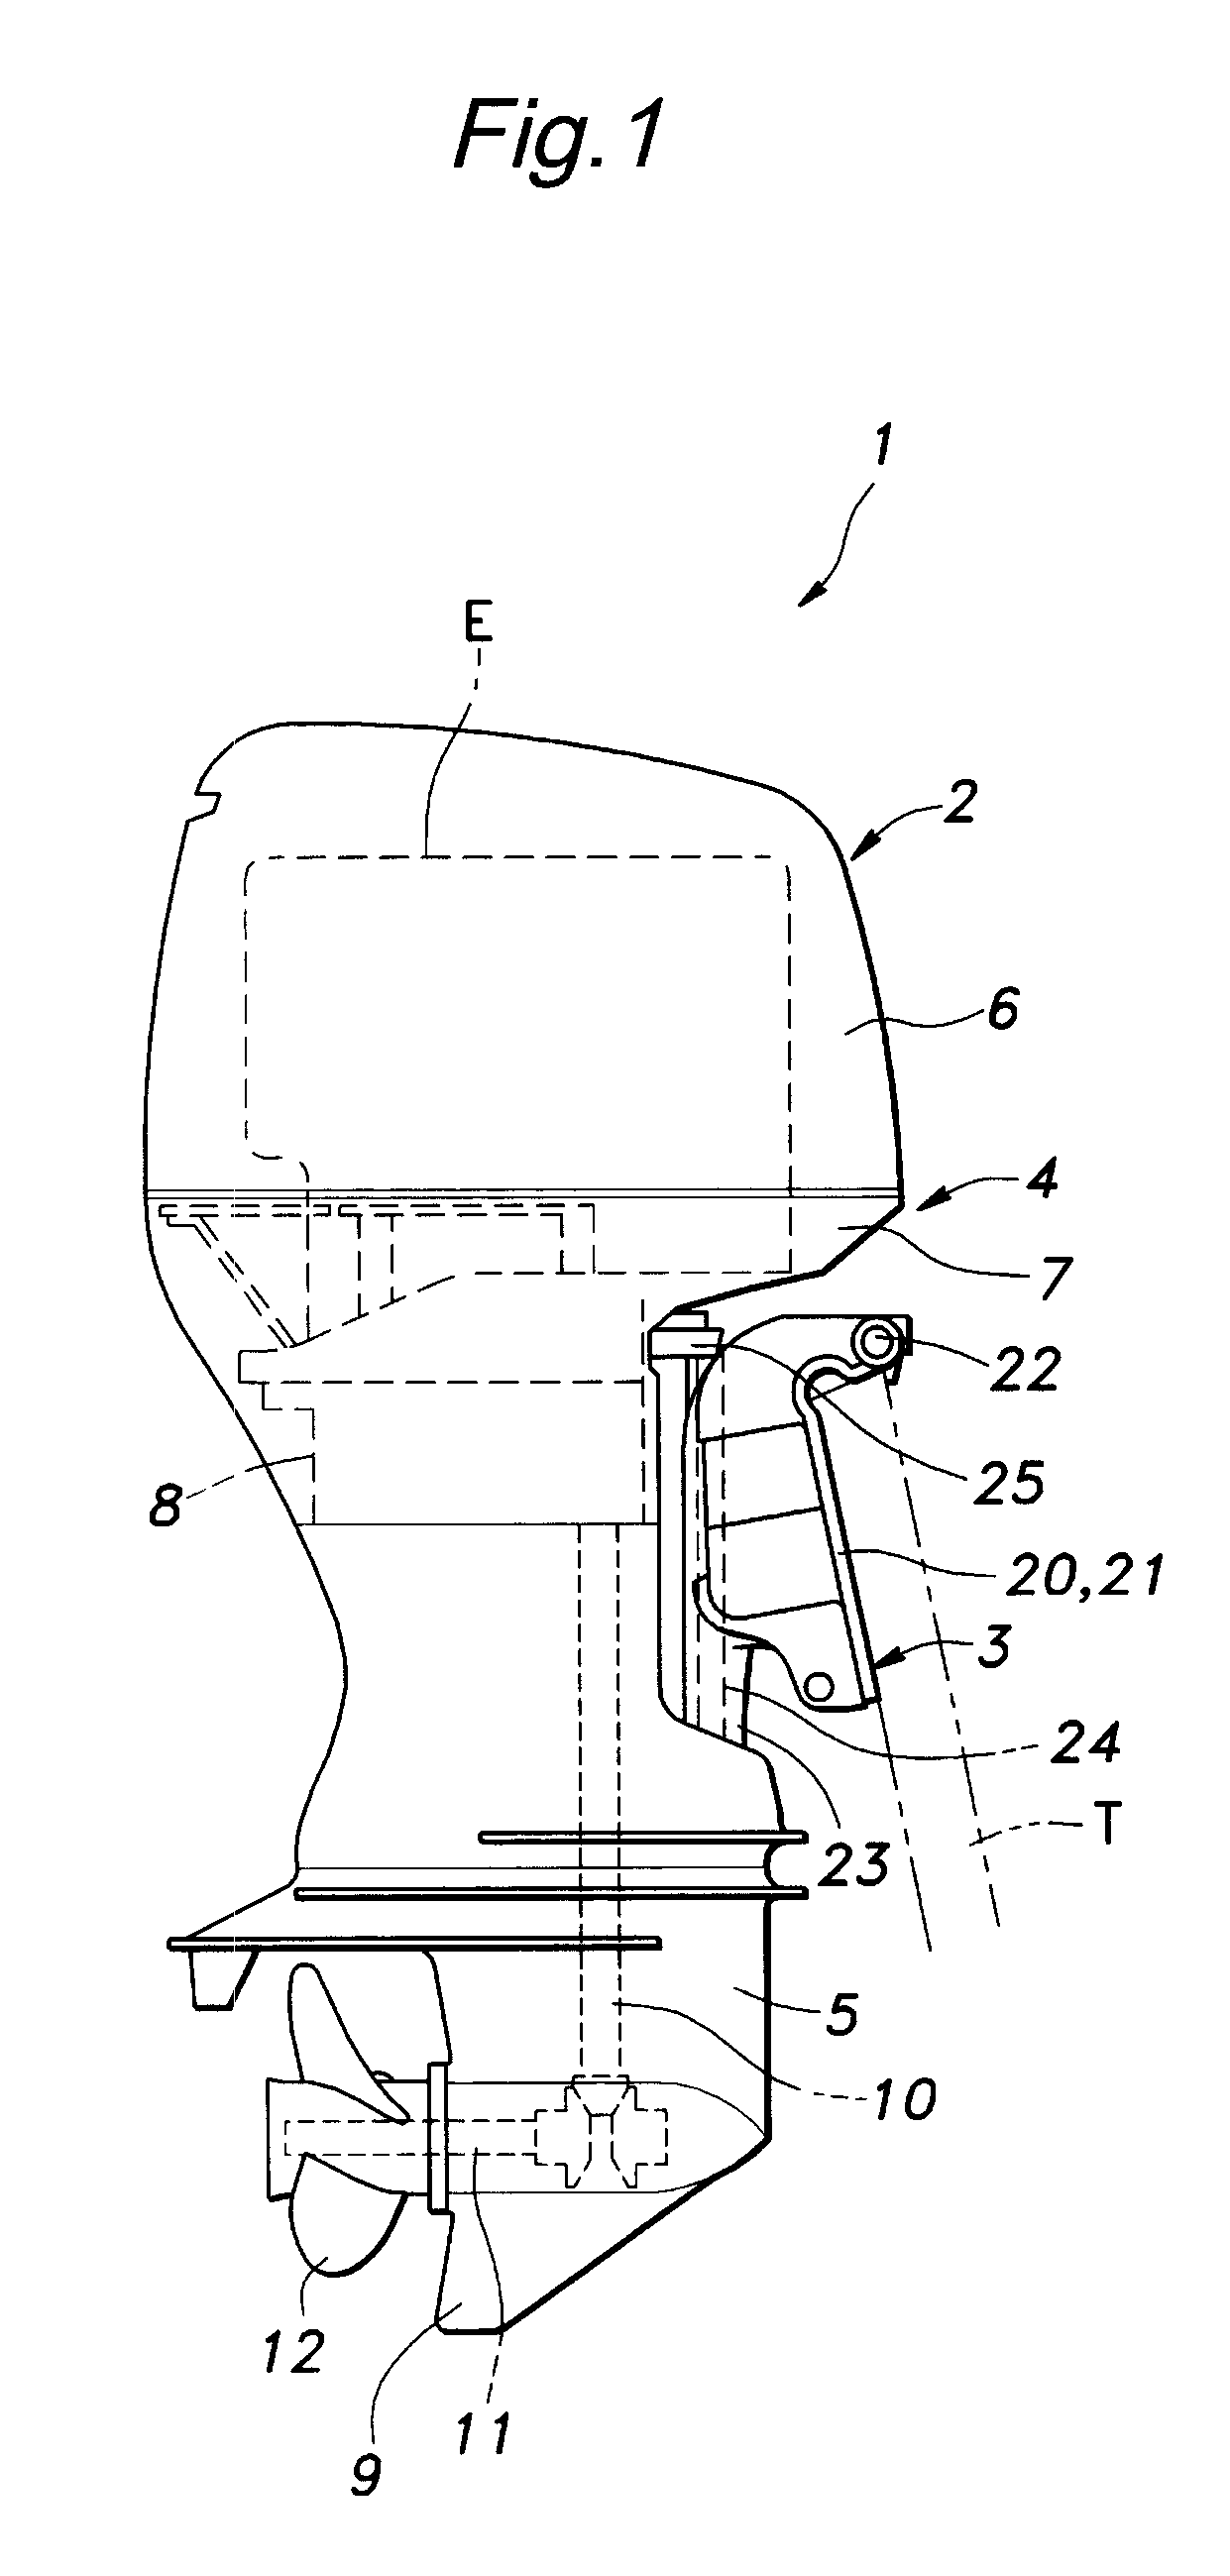 Outboard marine motor that allows a large steering angle